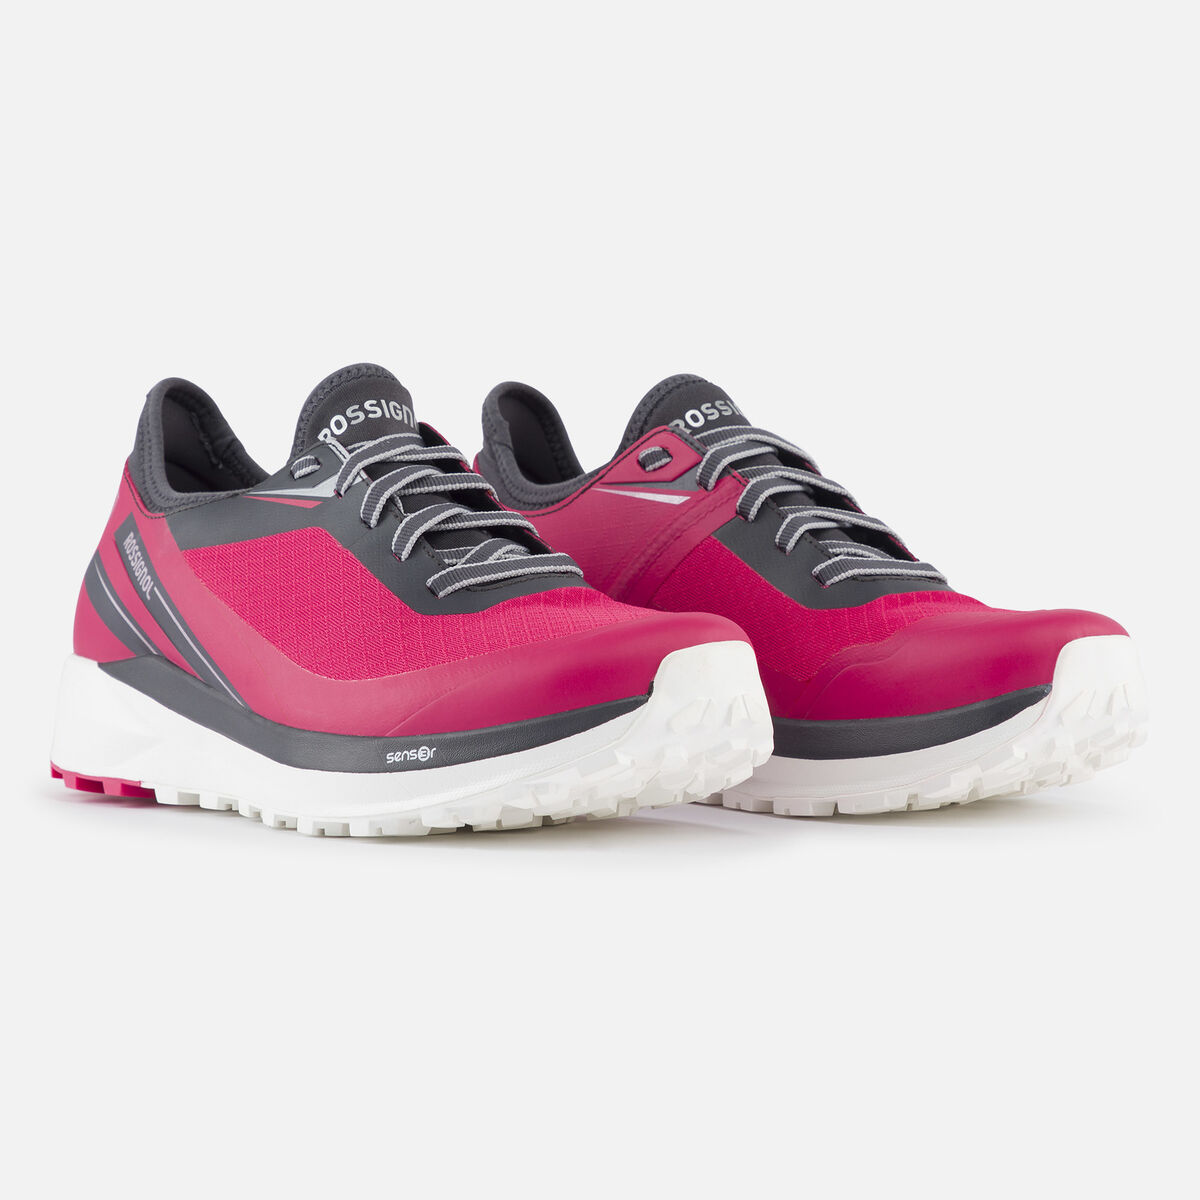 Chaussures Active outdoor imperméables roses femme